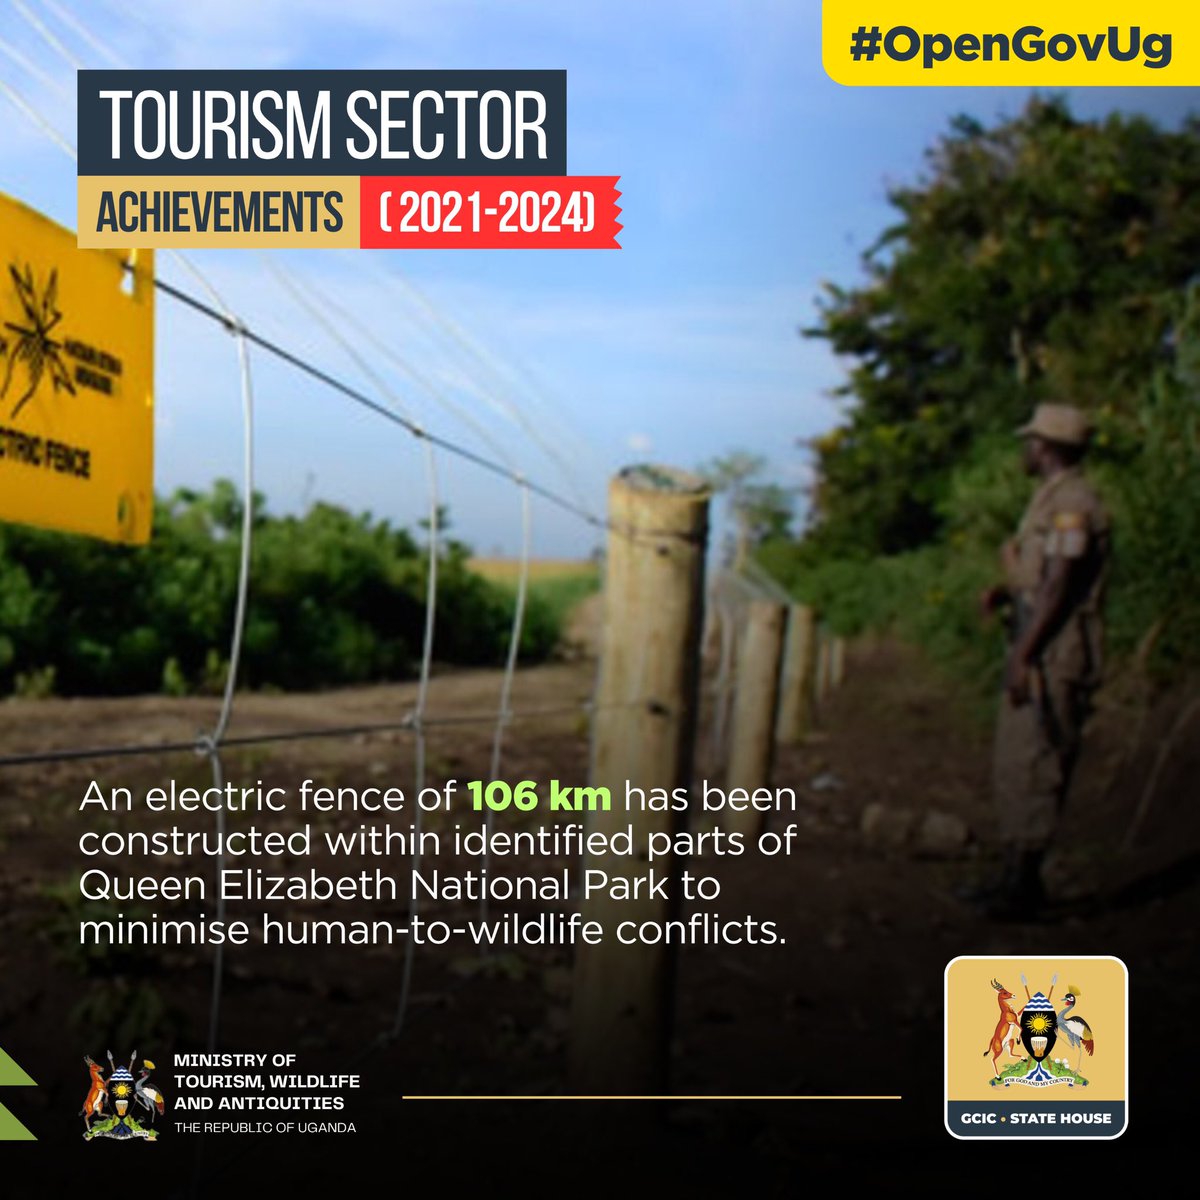 @DestinationUG1 @MTWAUganda @MAGEZIKIRIINJJU 🐘The manifesto’s mid-term review highlights the completion of 18 tourism roads, the operation of @UG_Airlines , the promotion of Uganda as a tourism brand, on-the-job training for 20,000 workers, and the construction of a 106-km electric fence in Queen Elizabeth National Park.